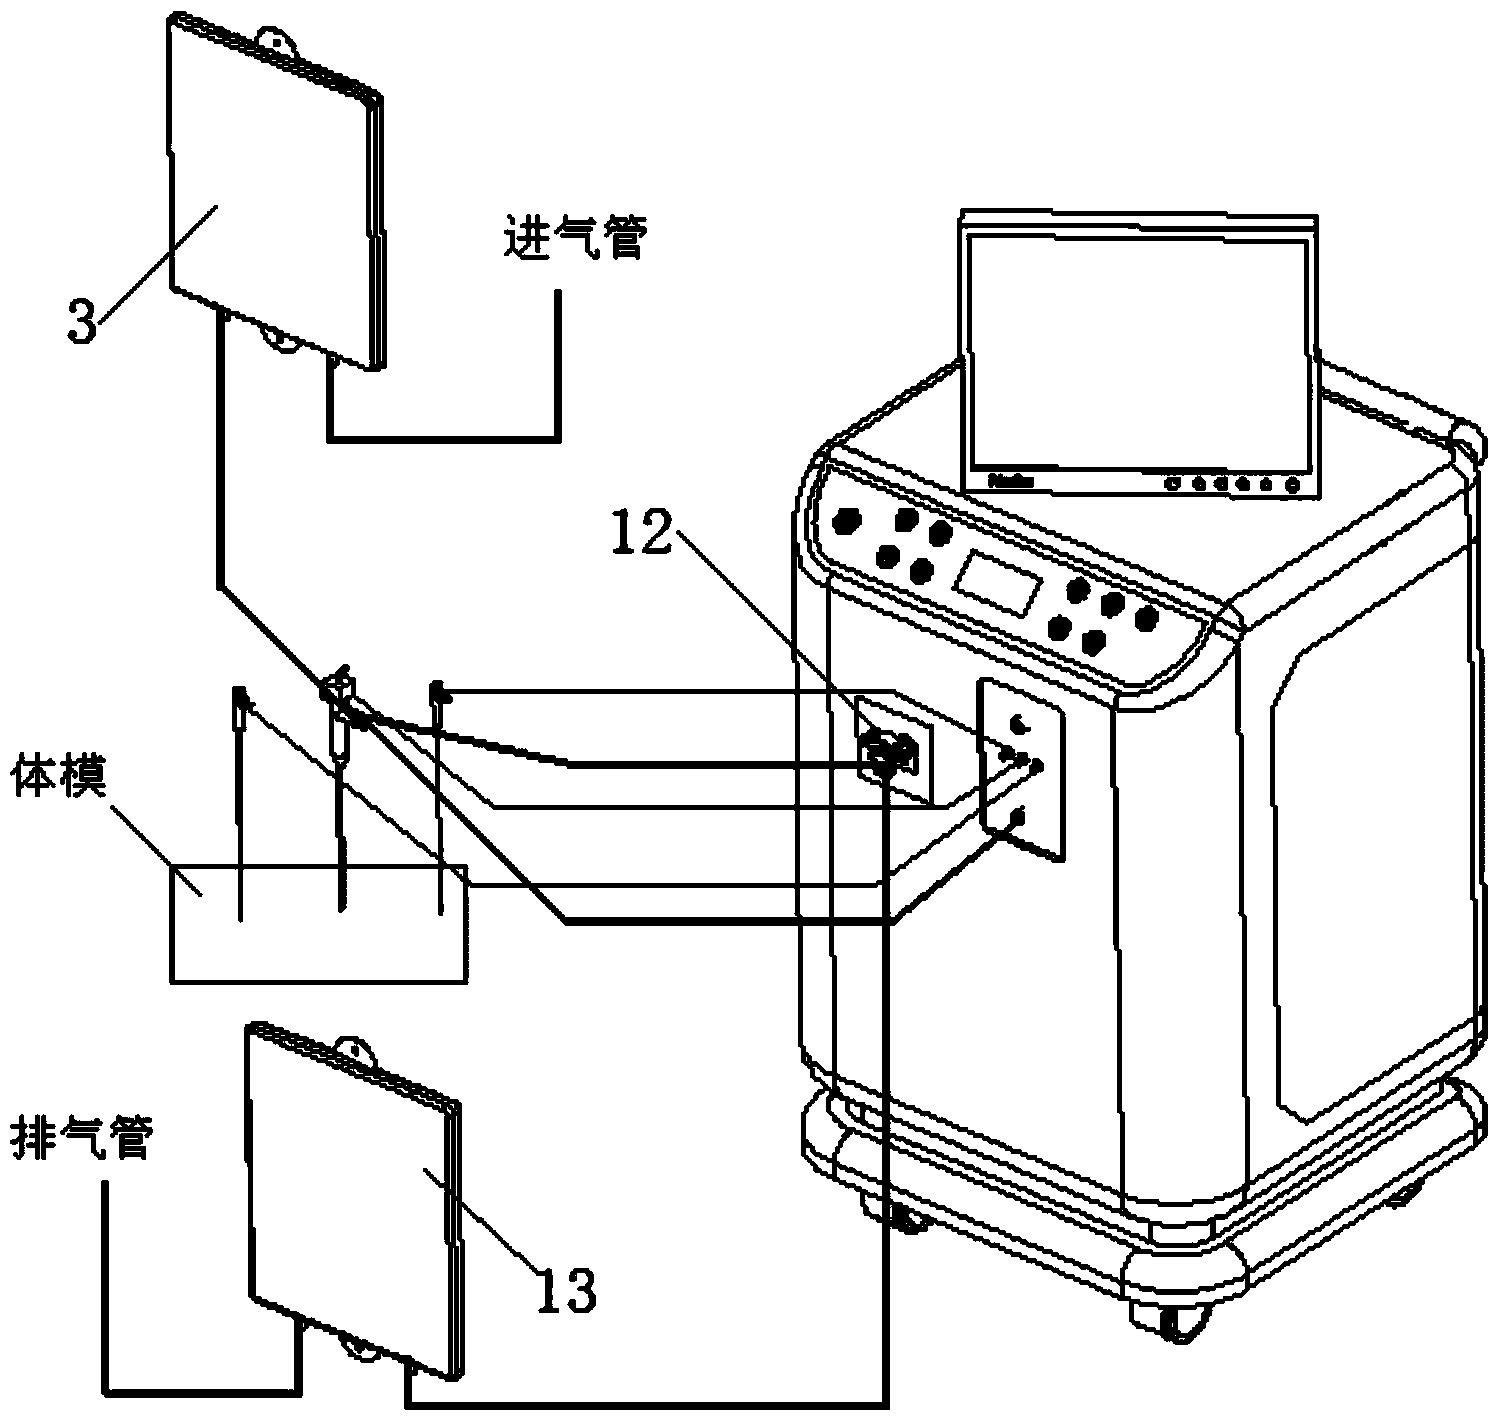 Novel multi-frequency tumor therapy apparatus